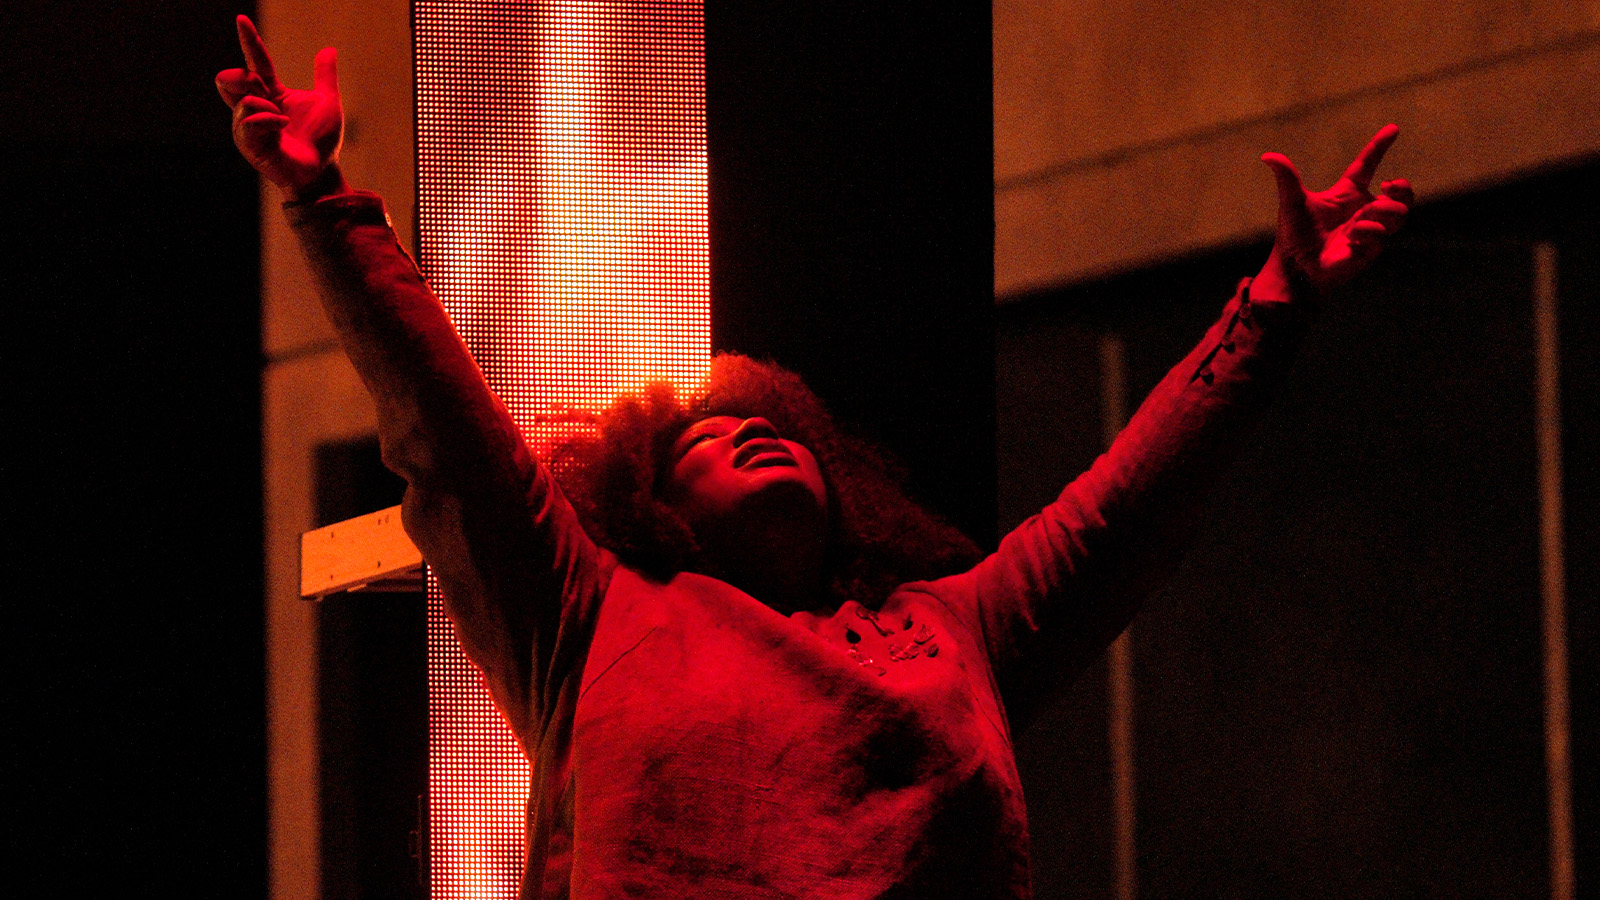 A woman in a tunic raises her arms to the sky in a wash of red light